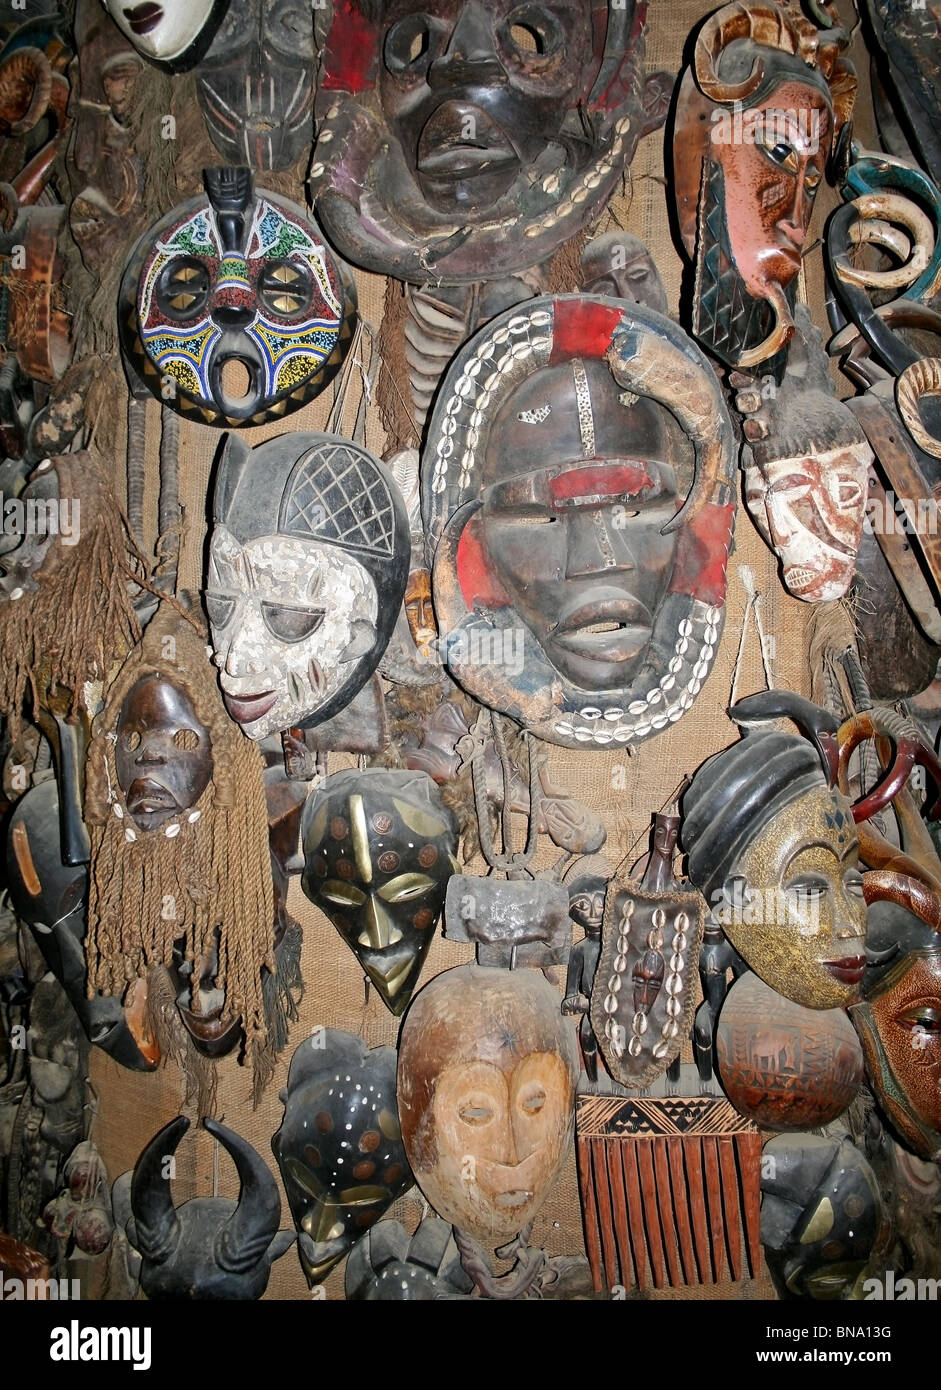 Masai wooden Masks and traditional craft items being sold at a souvenir shop near Masai Mara National Reserve Kenya, East Africa Stock Photo